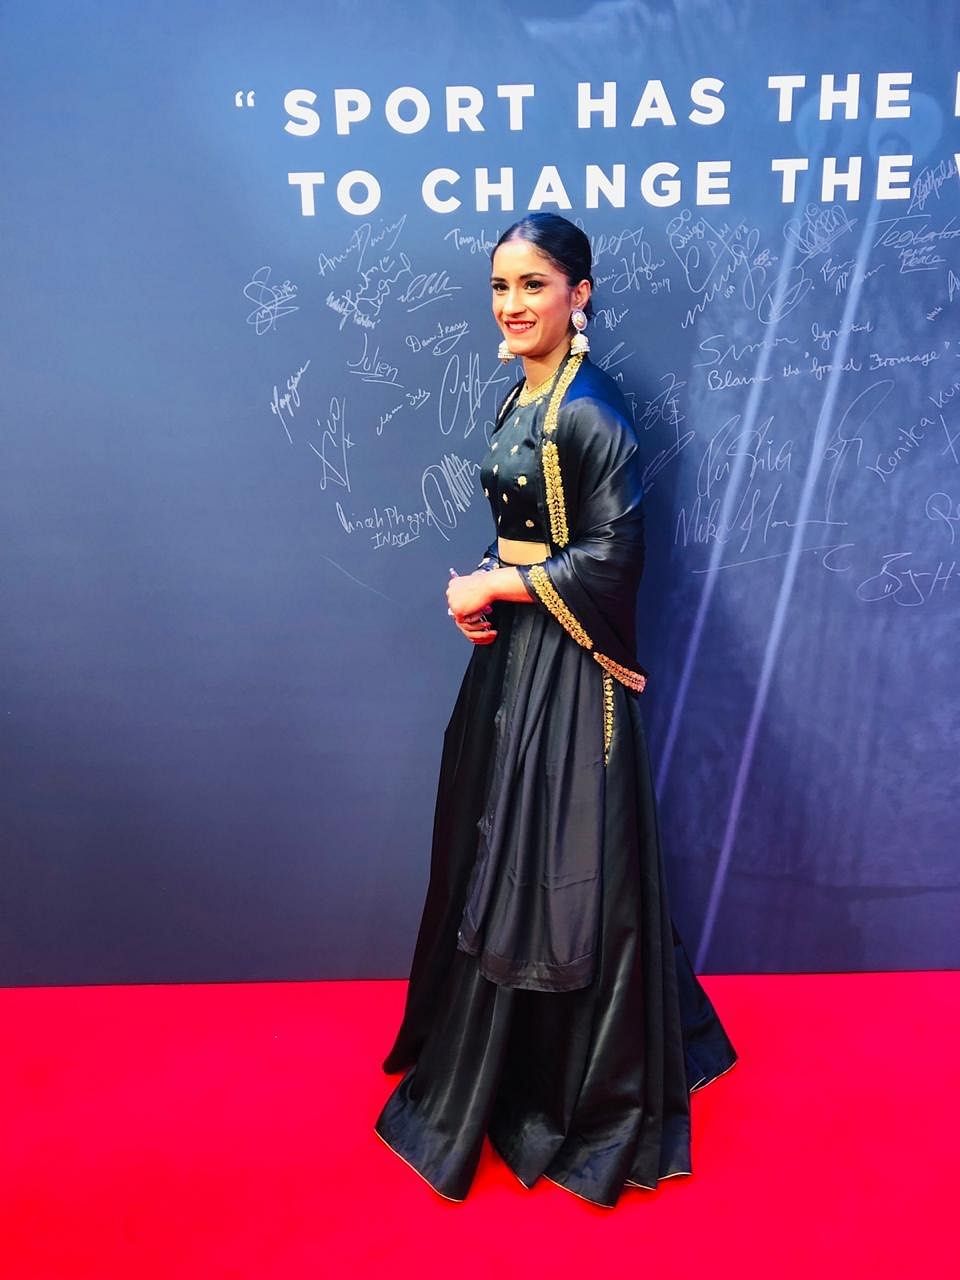 Vinesh Phogat attends the Laureus Sports Awards on Monday night and lit up the red carpet.